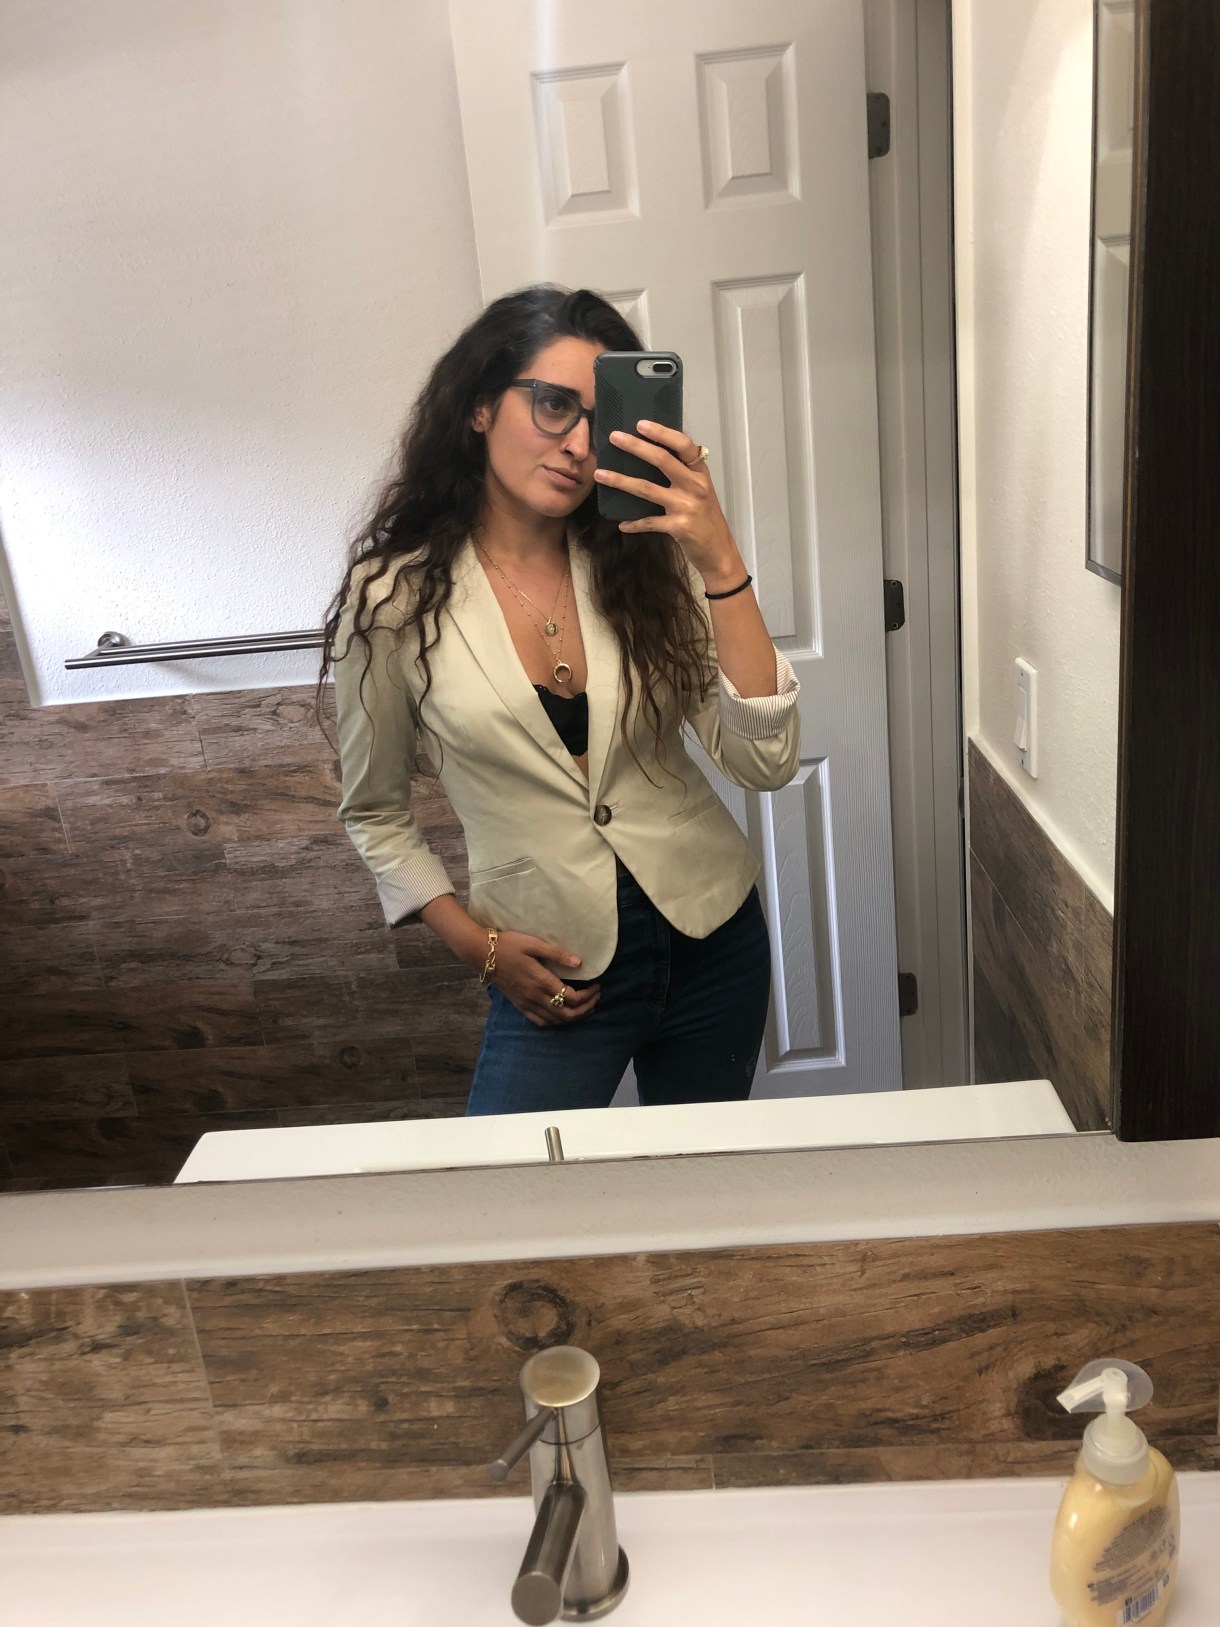 Kayla Kumari Upadhyaya wears a beige blazer buttoned over just. a black lacey bra and ripped jeans. She also wears two gold necklaces and is taking a selfie in the mirror.